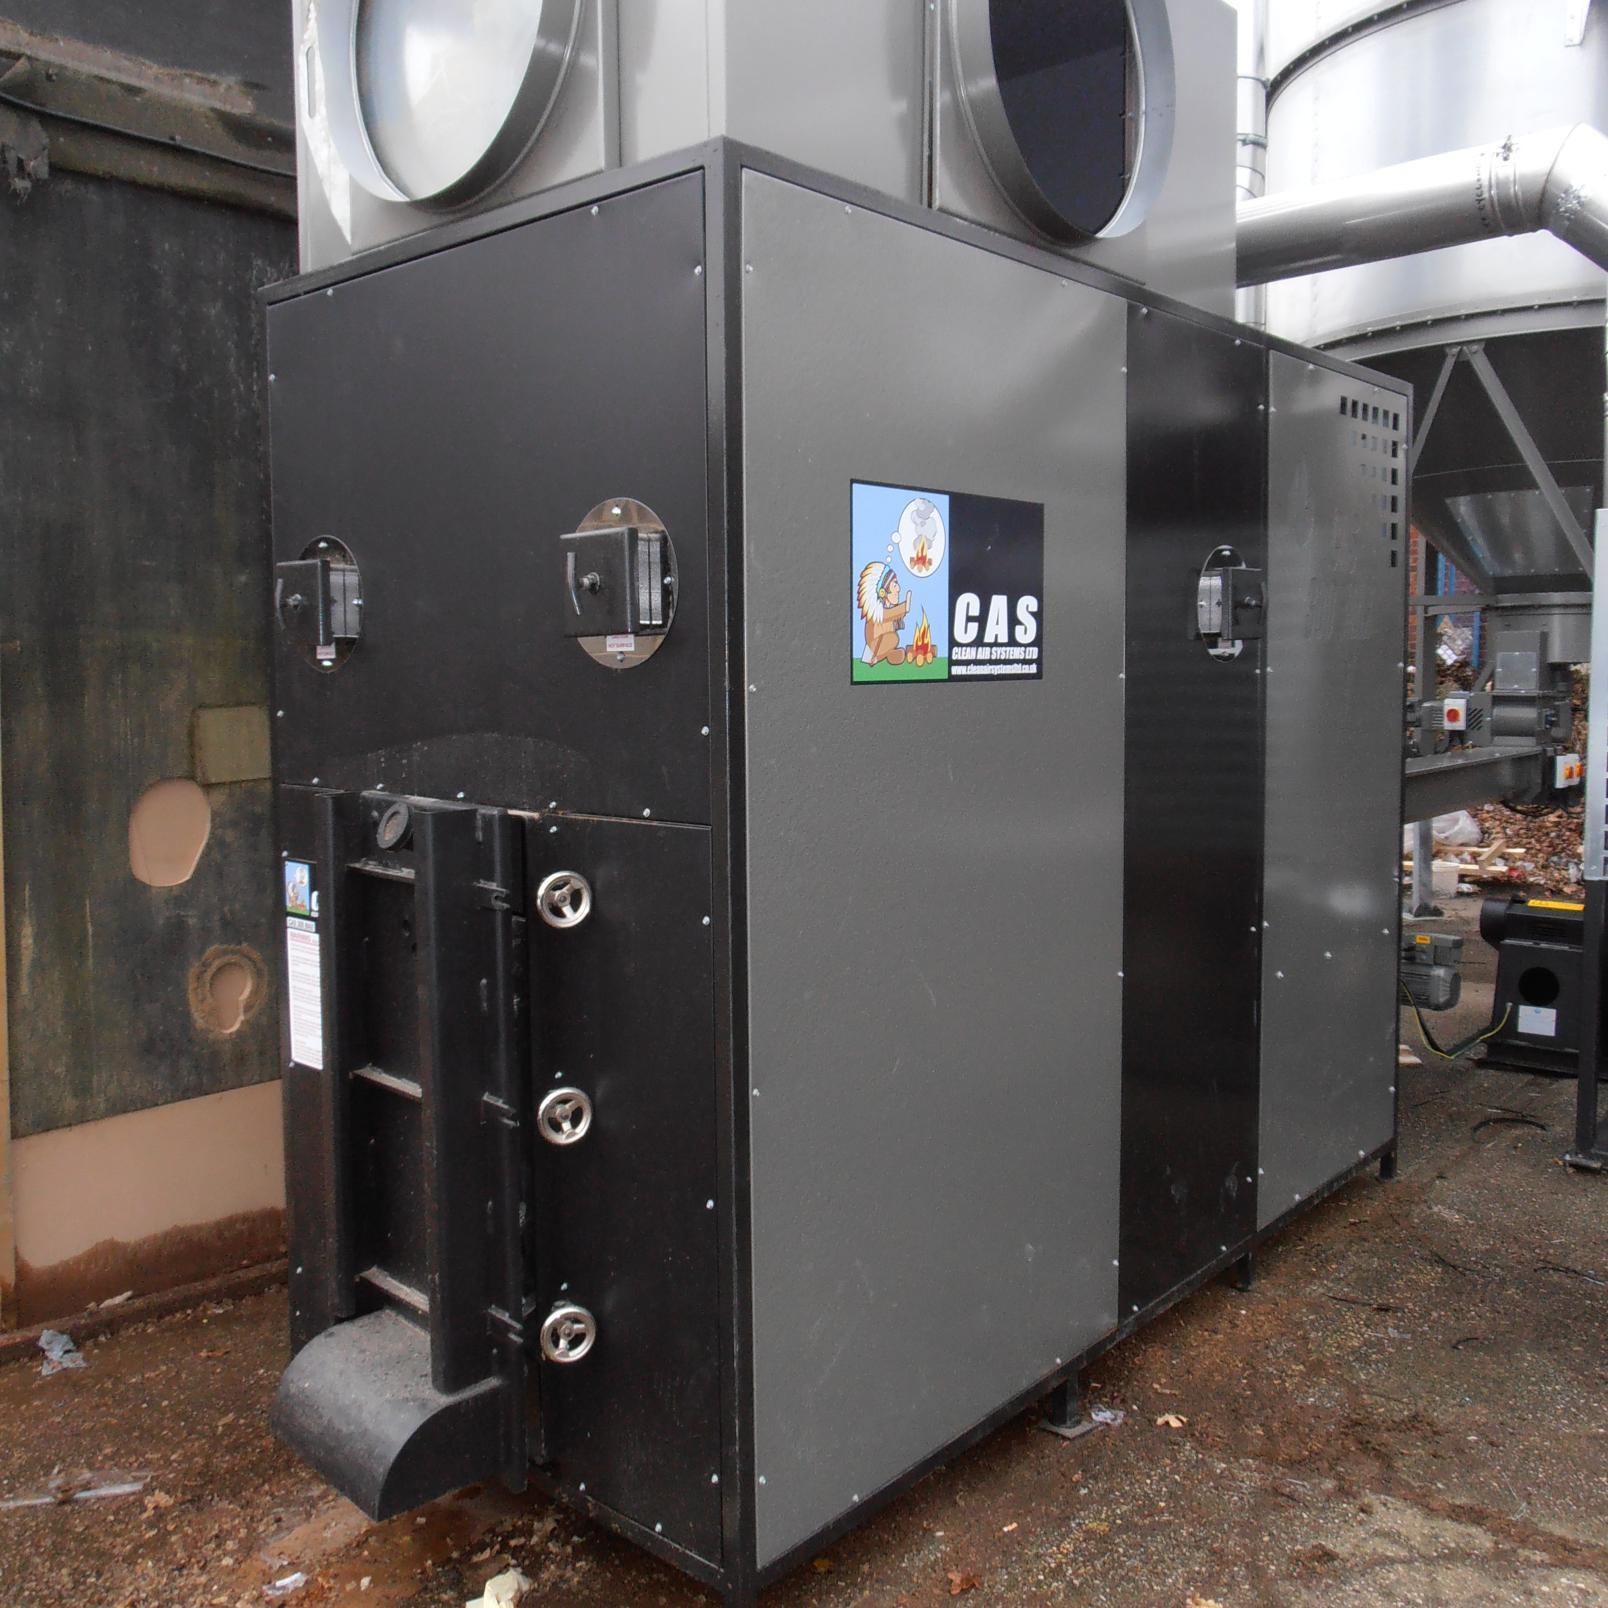 Woodheat Solutions Ltd provides servicing and sales of wood fuelled hot air heating systems nationwide.